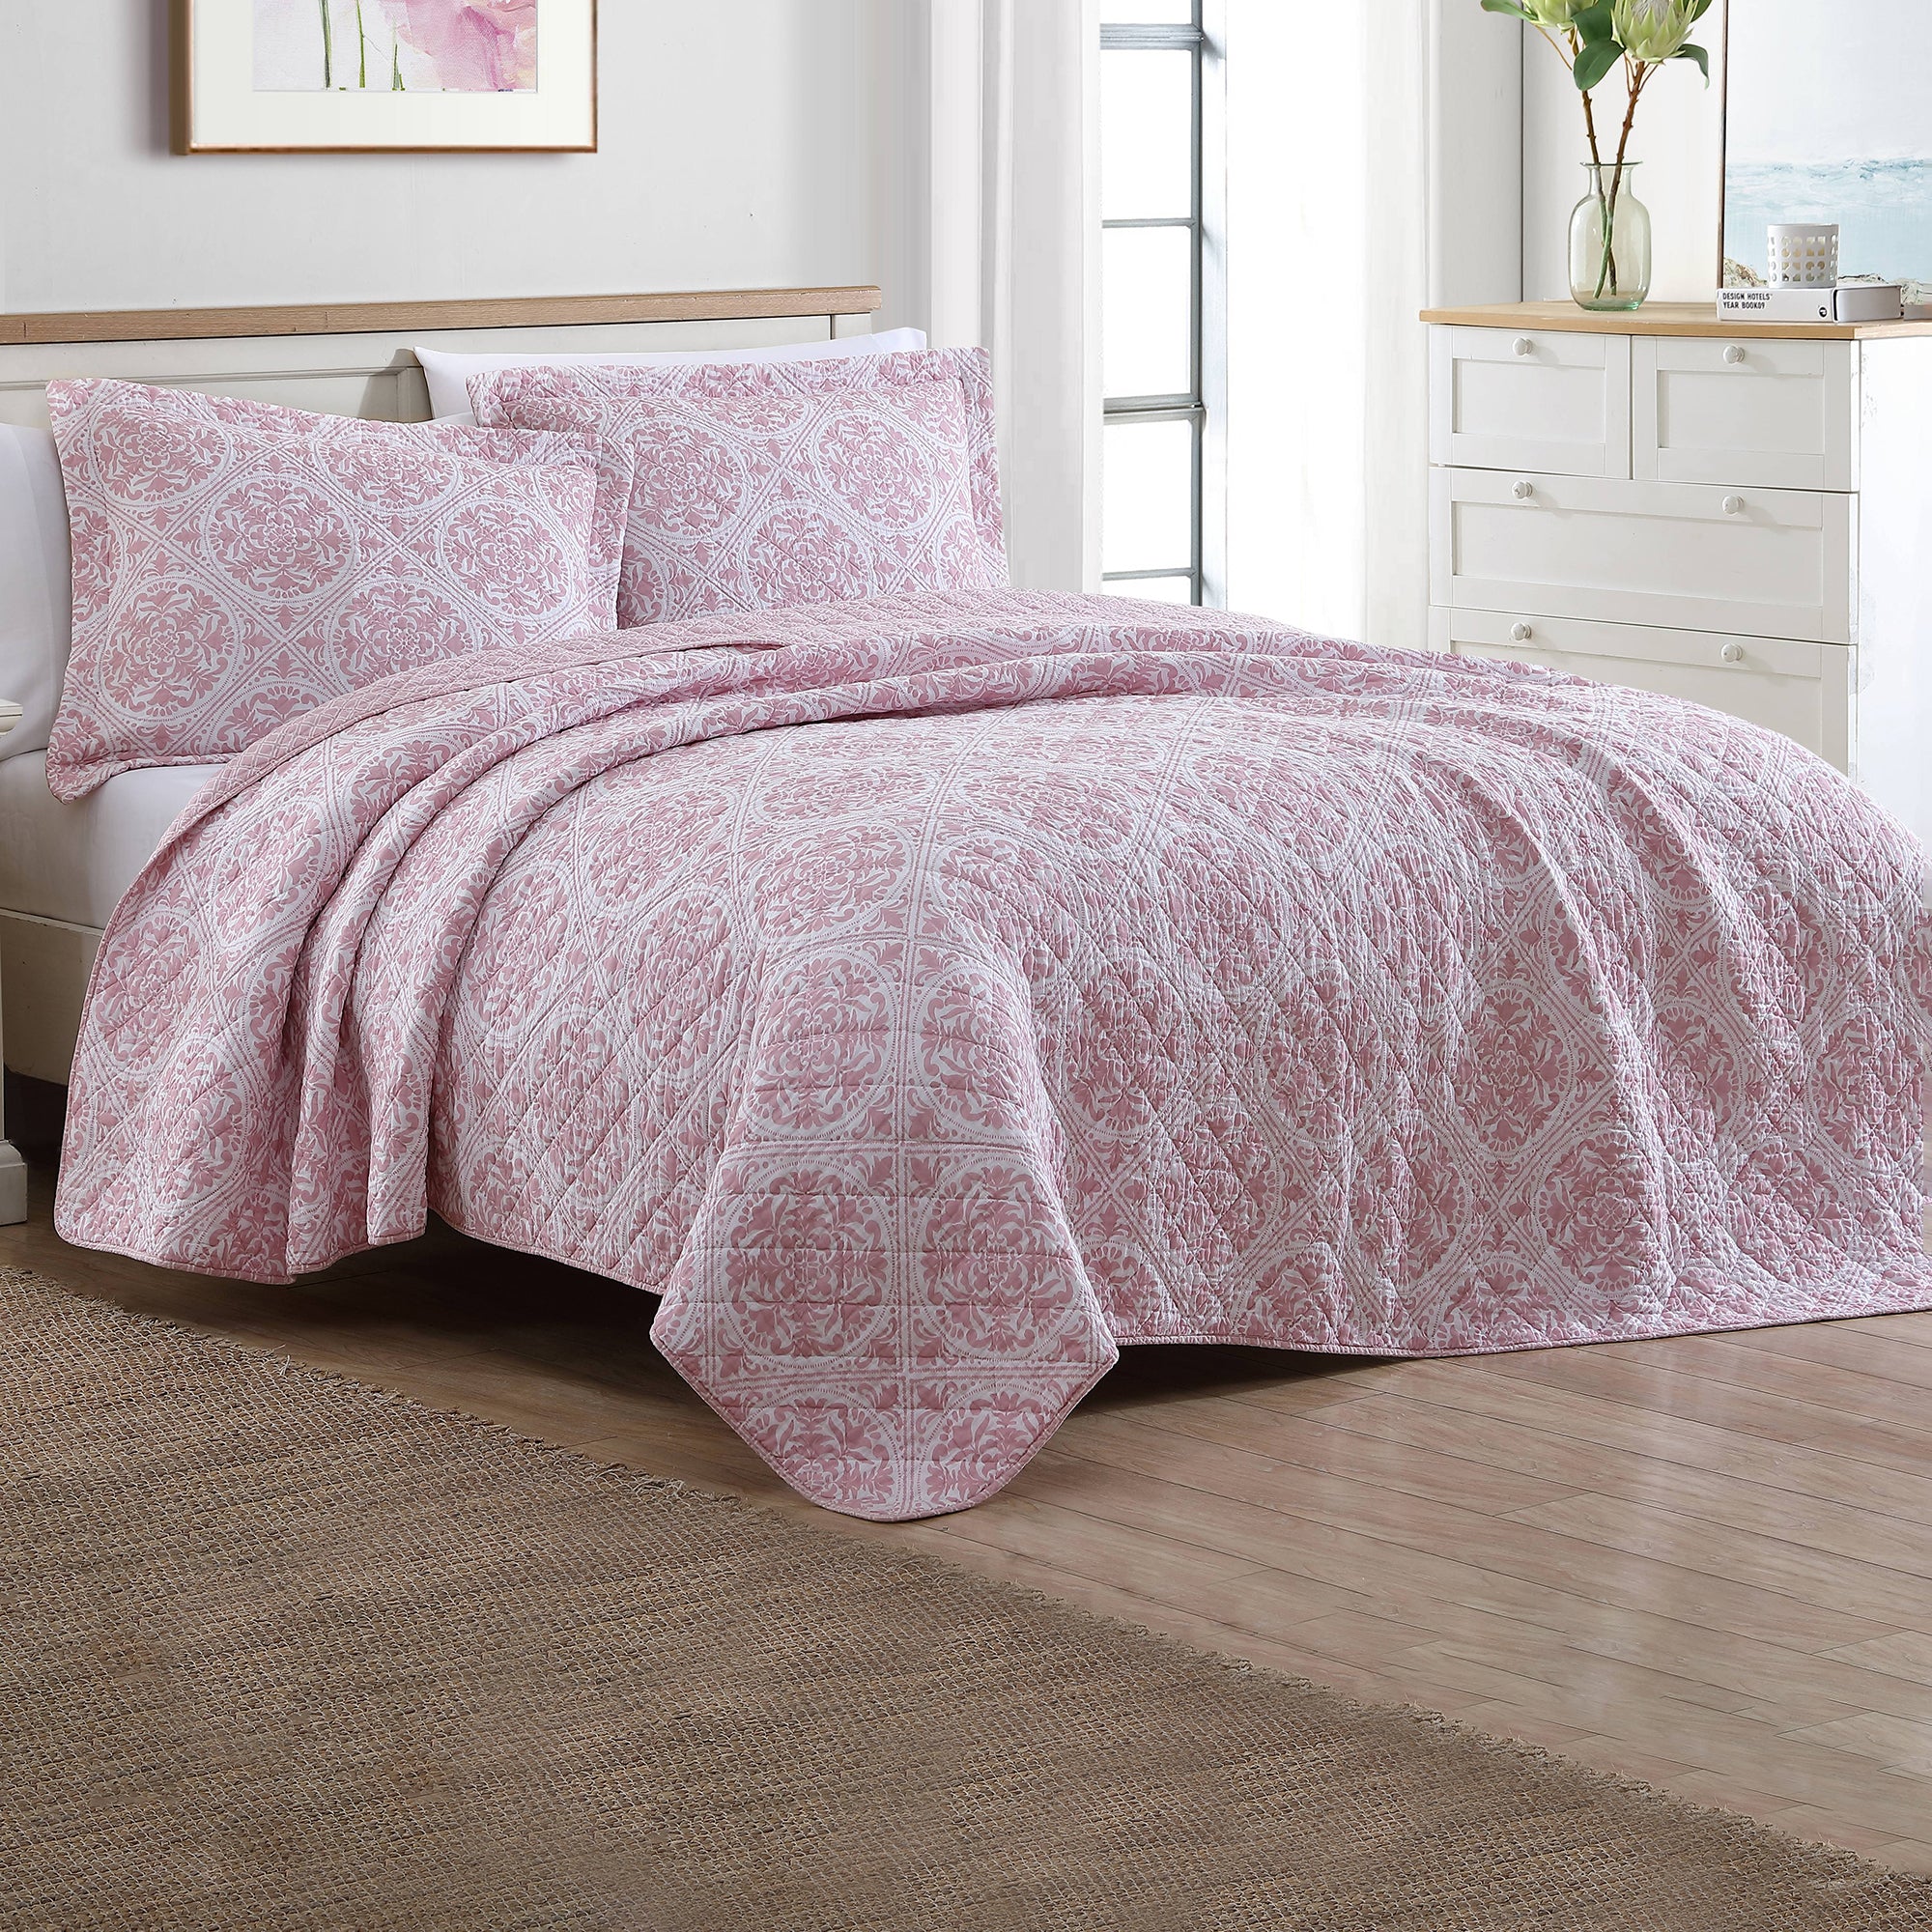 The Ayla Coverlet Set Dusted Rose by Laura Ashley features a gorgeous light pink medallion design on white ground that will add elegance to your bedroom.